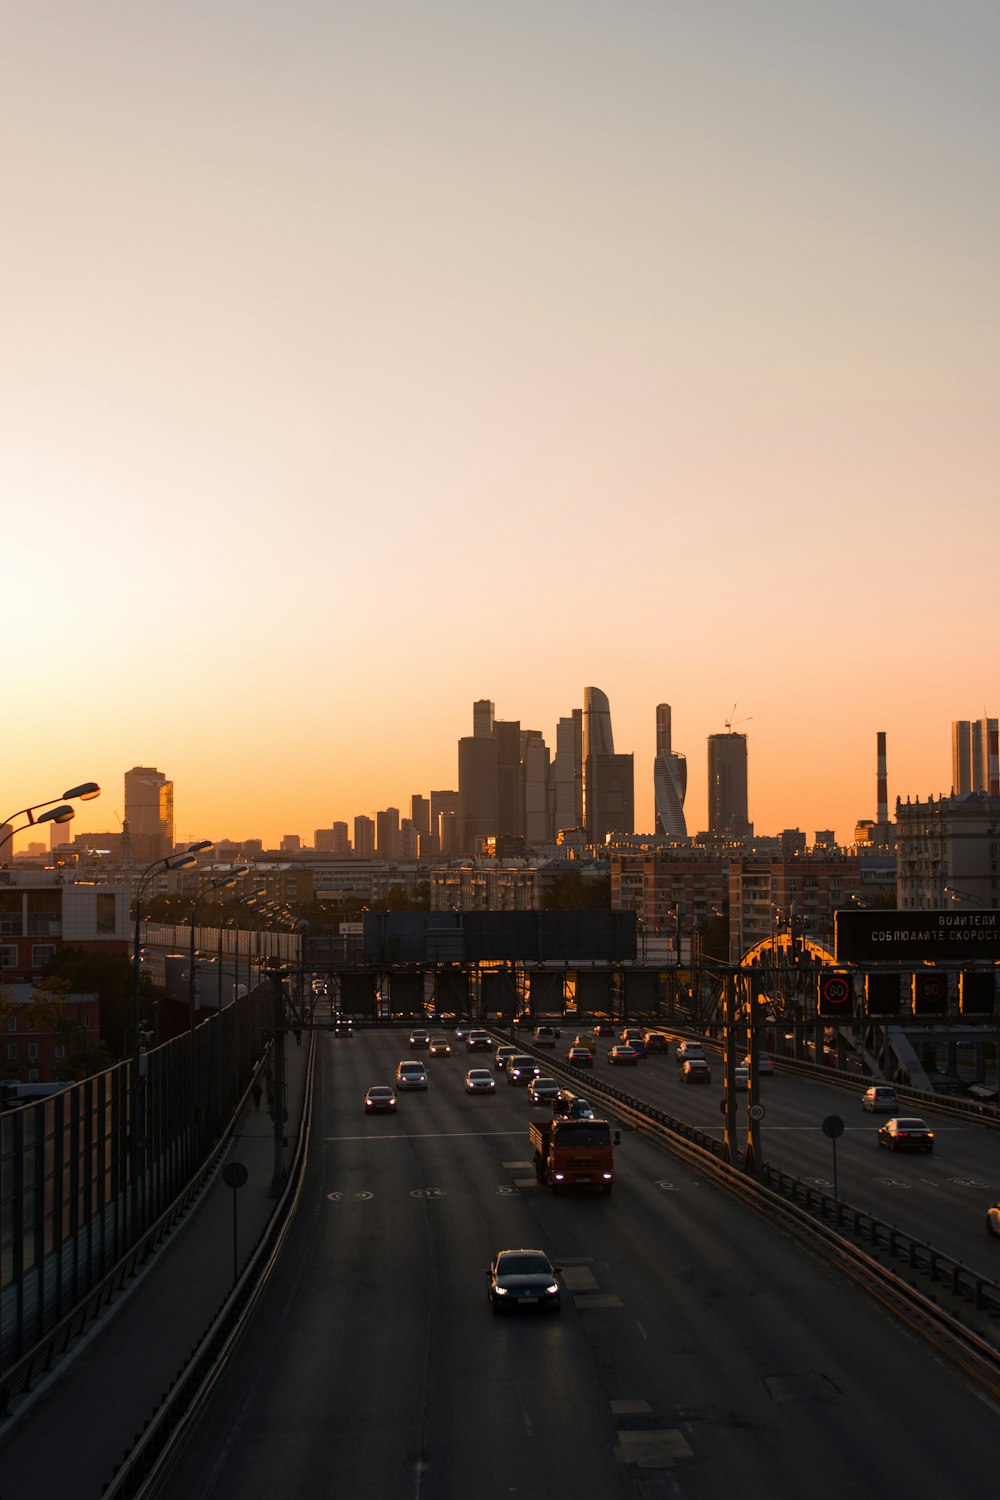 a sunset view of a highway with a city in the background